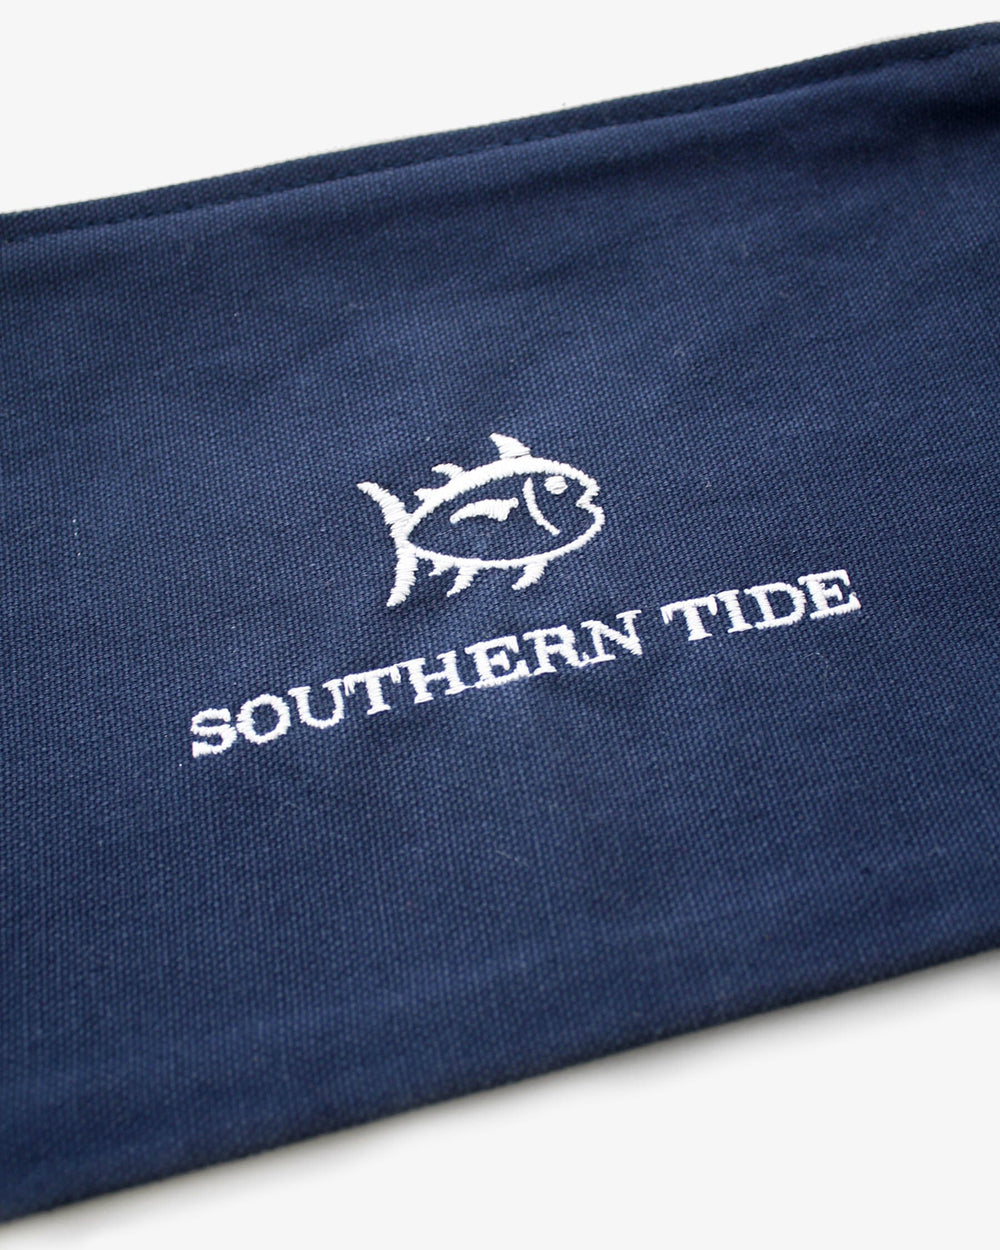 The detail view of the Southern Tide Southern Tide Clutch by Southern Tide - Navy